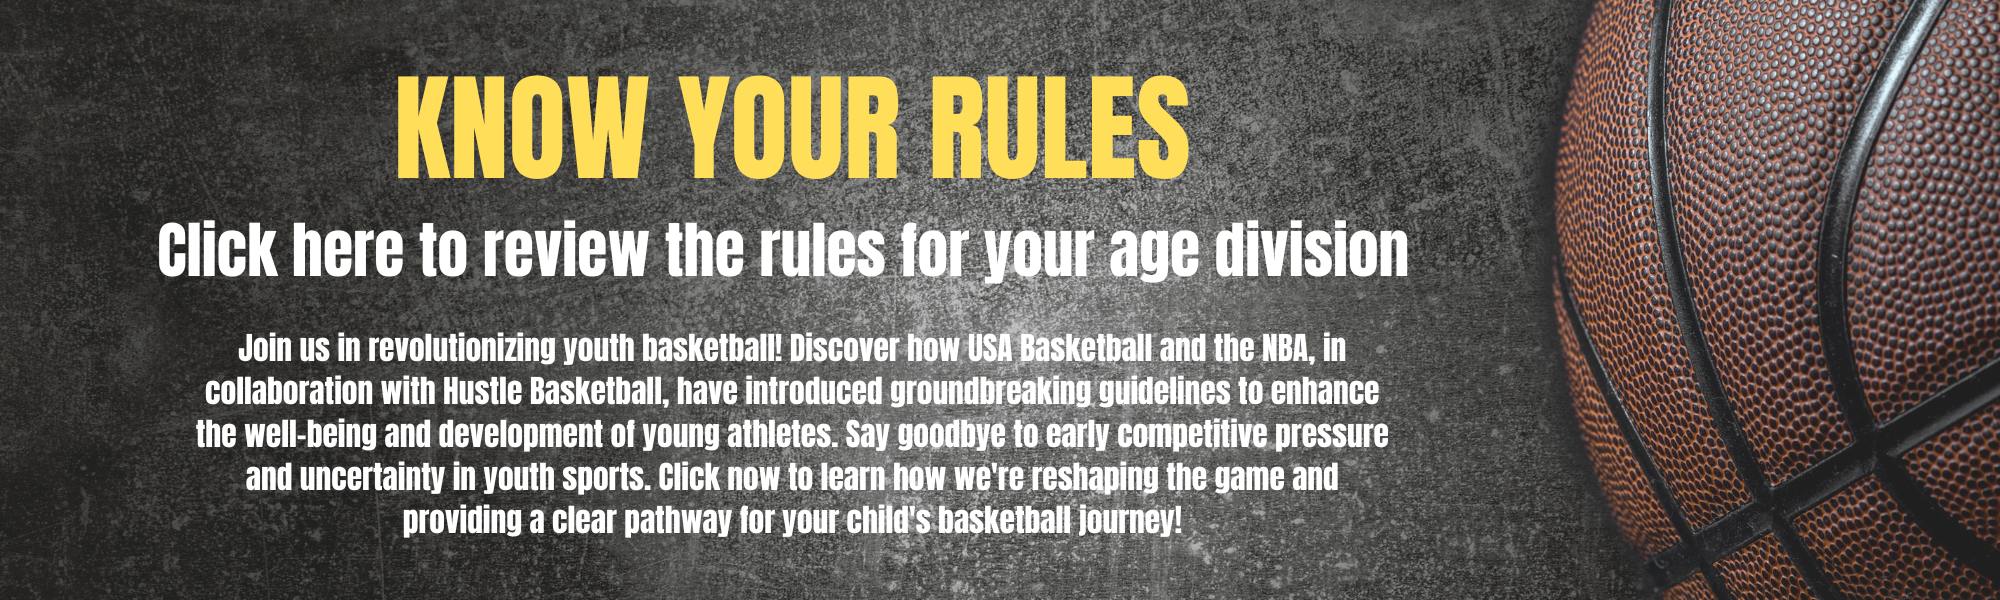 KNOW YOUR RULES BANNER